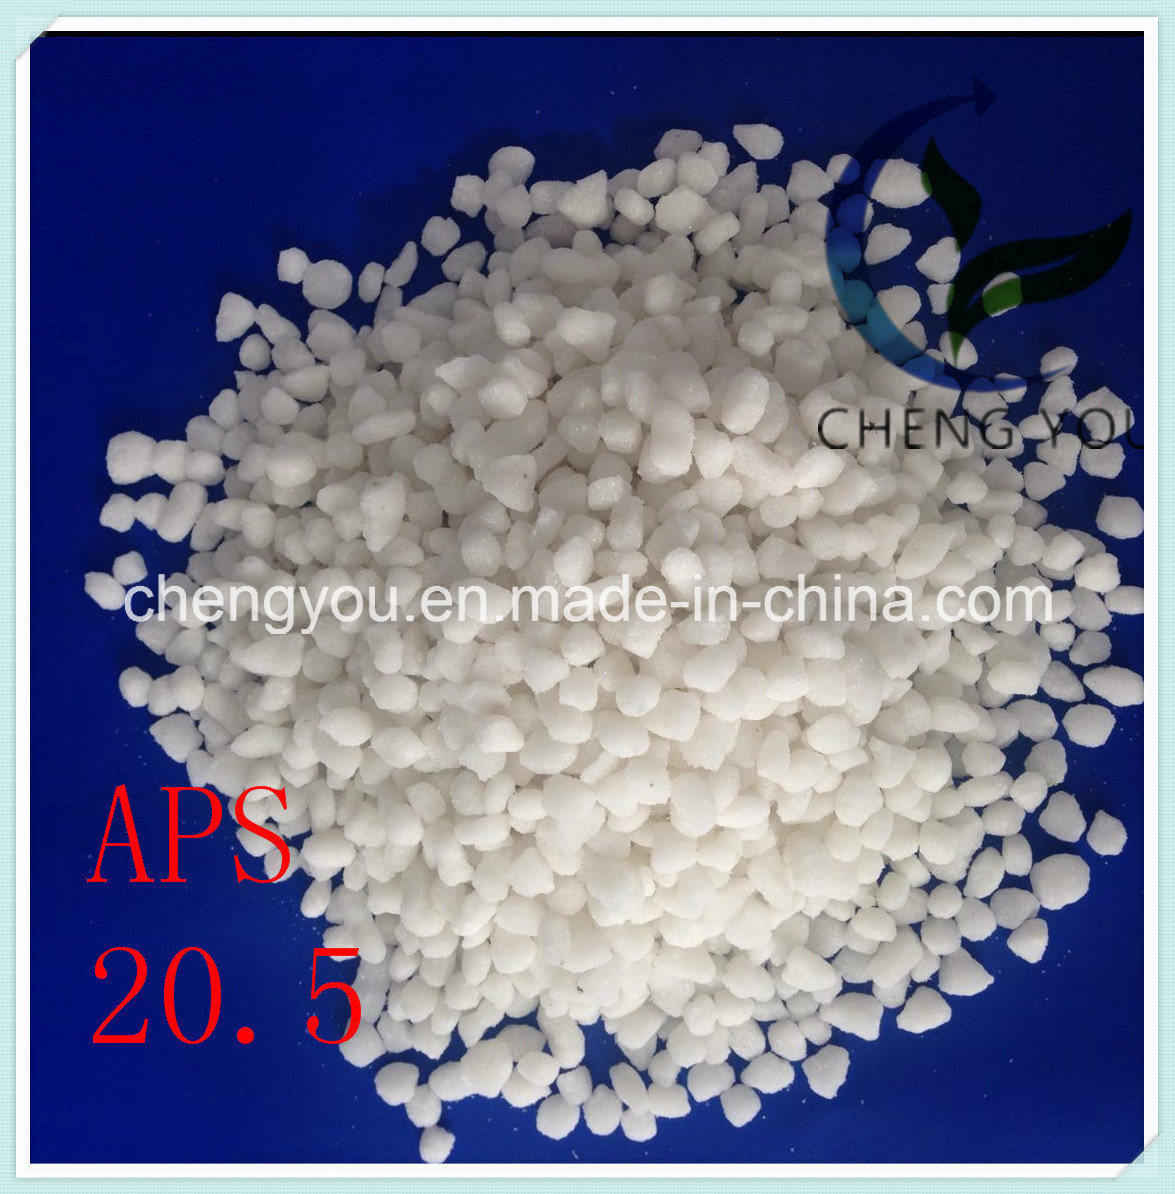 China Ammonium Sulphate Fertilizer with Low Price